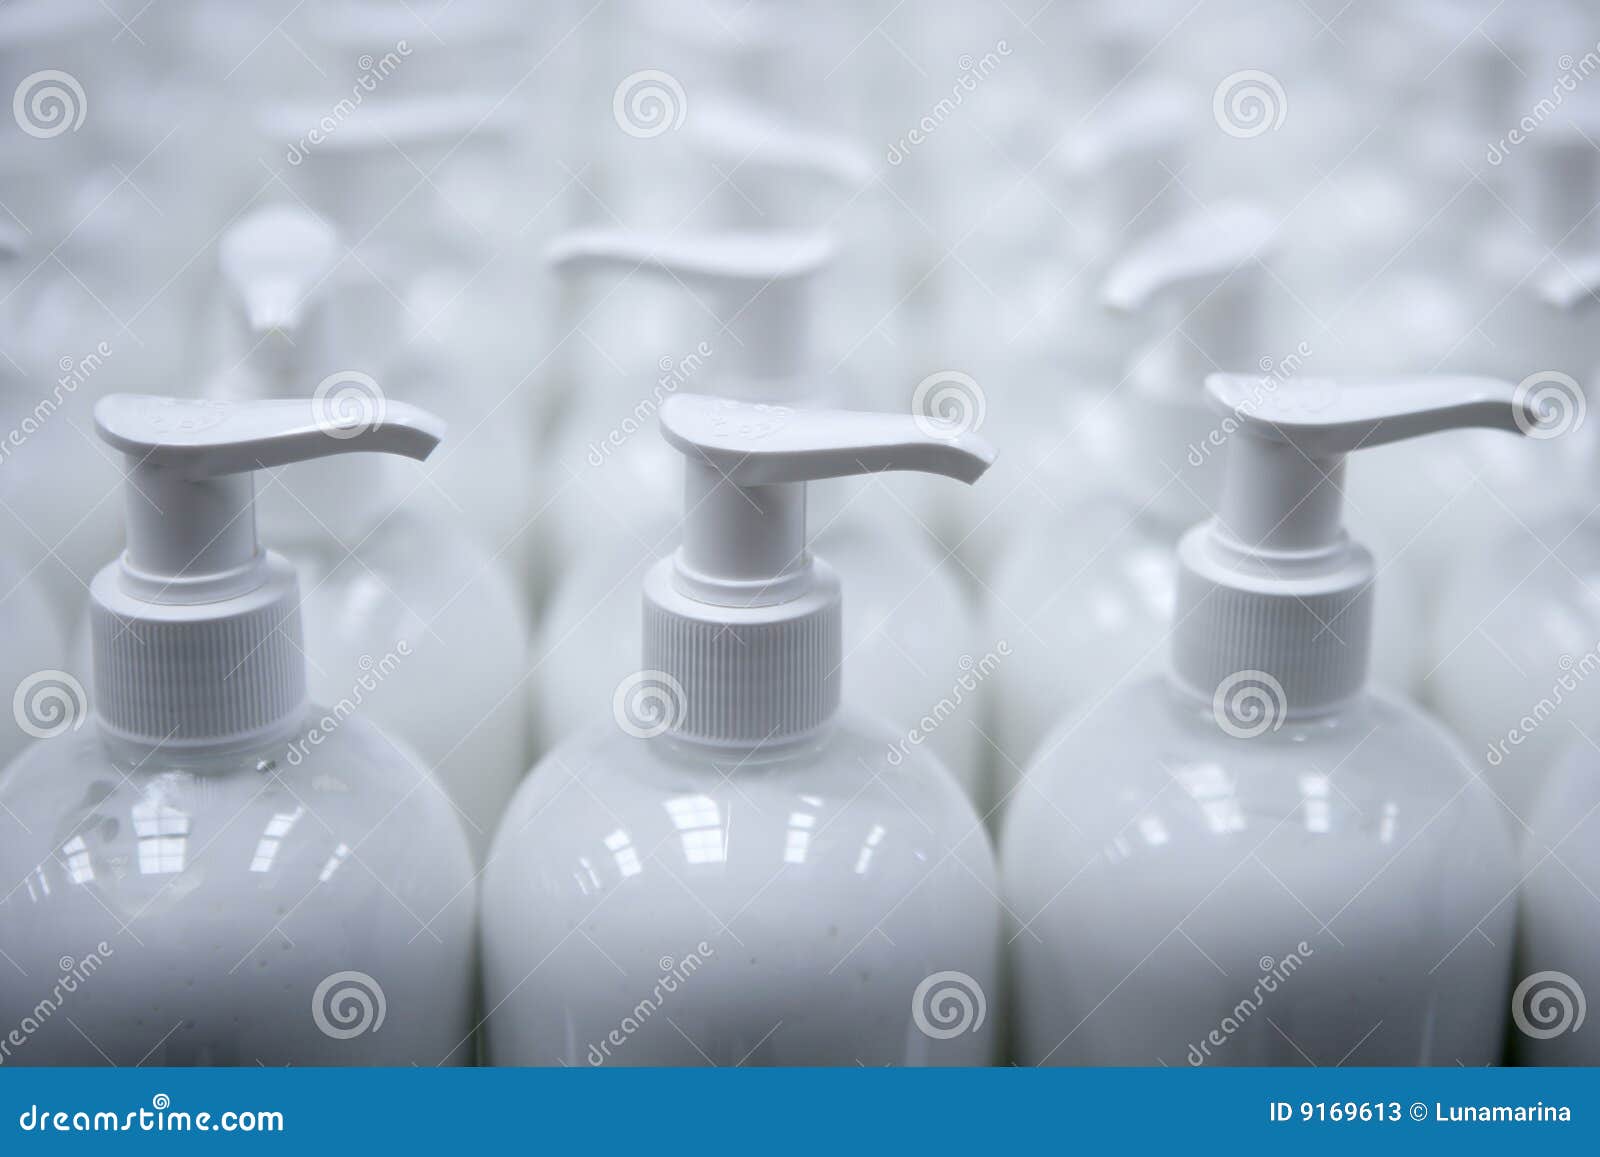 white plastic soap bottles in rows assembly line